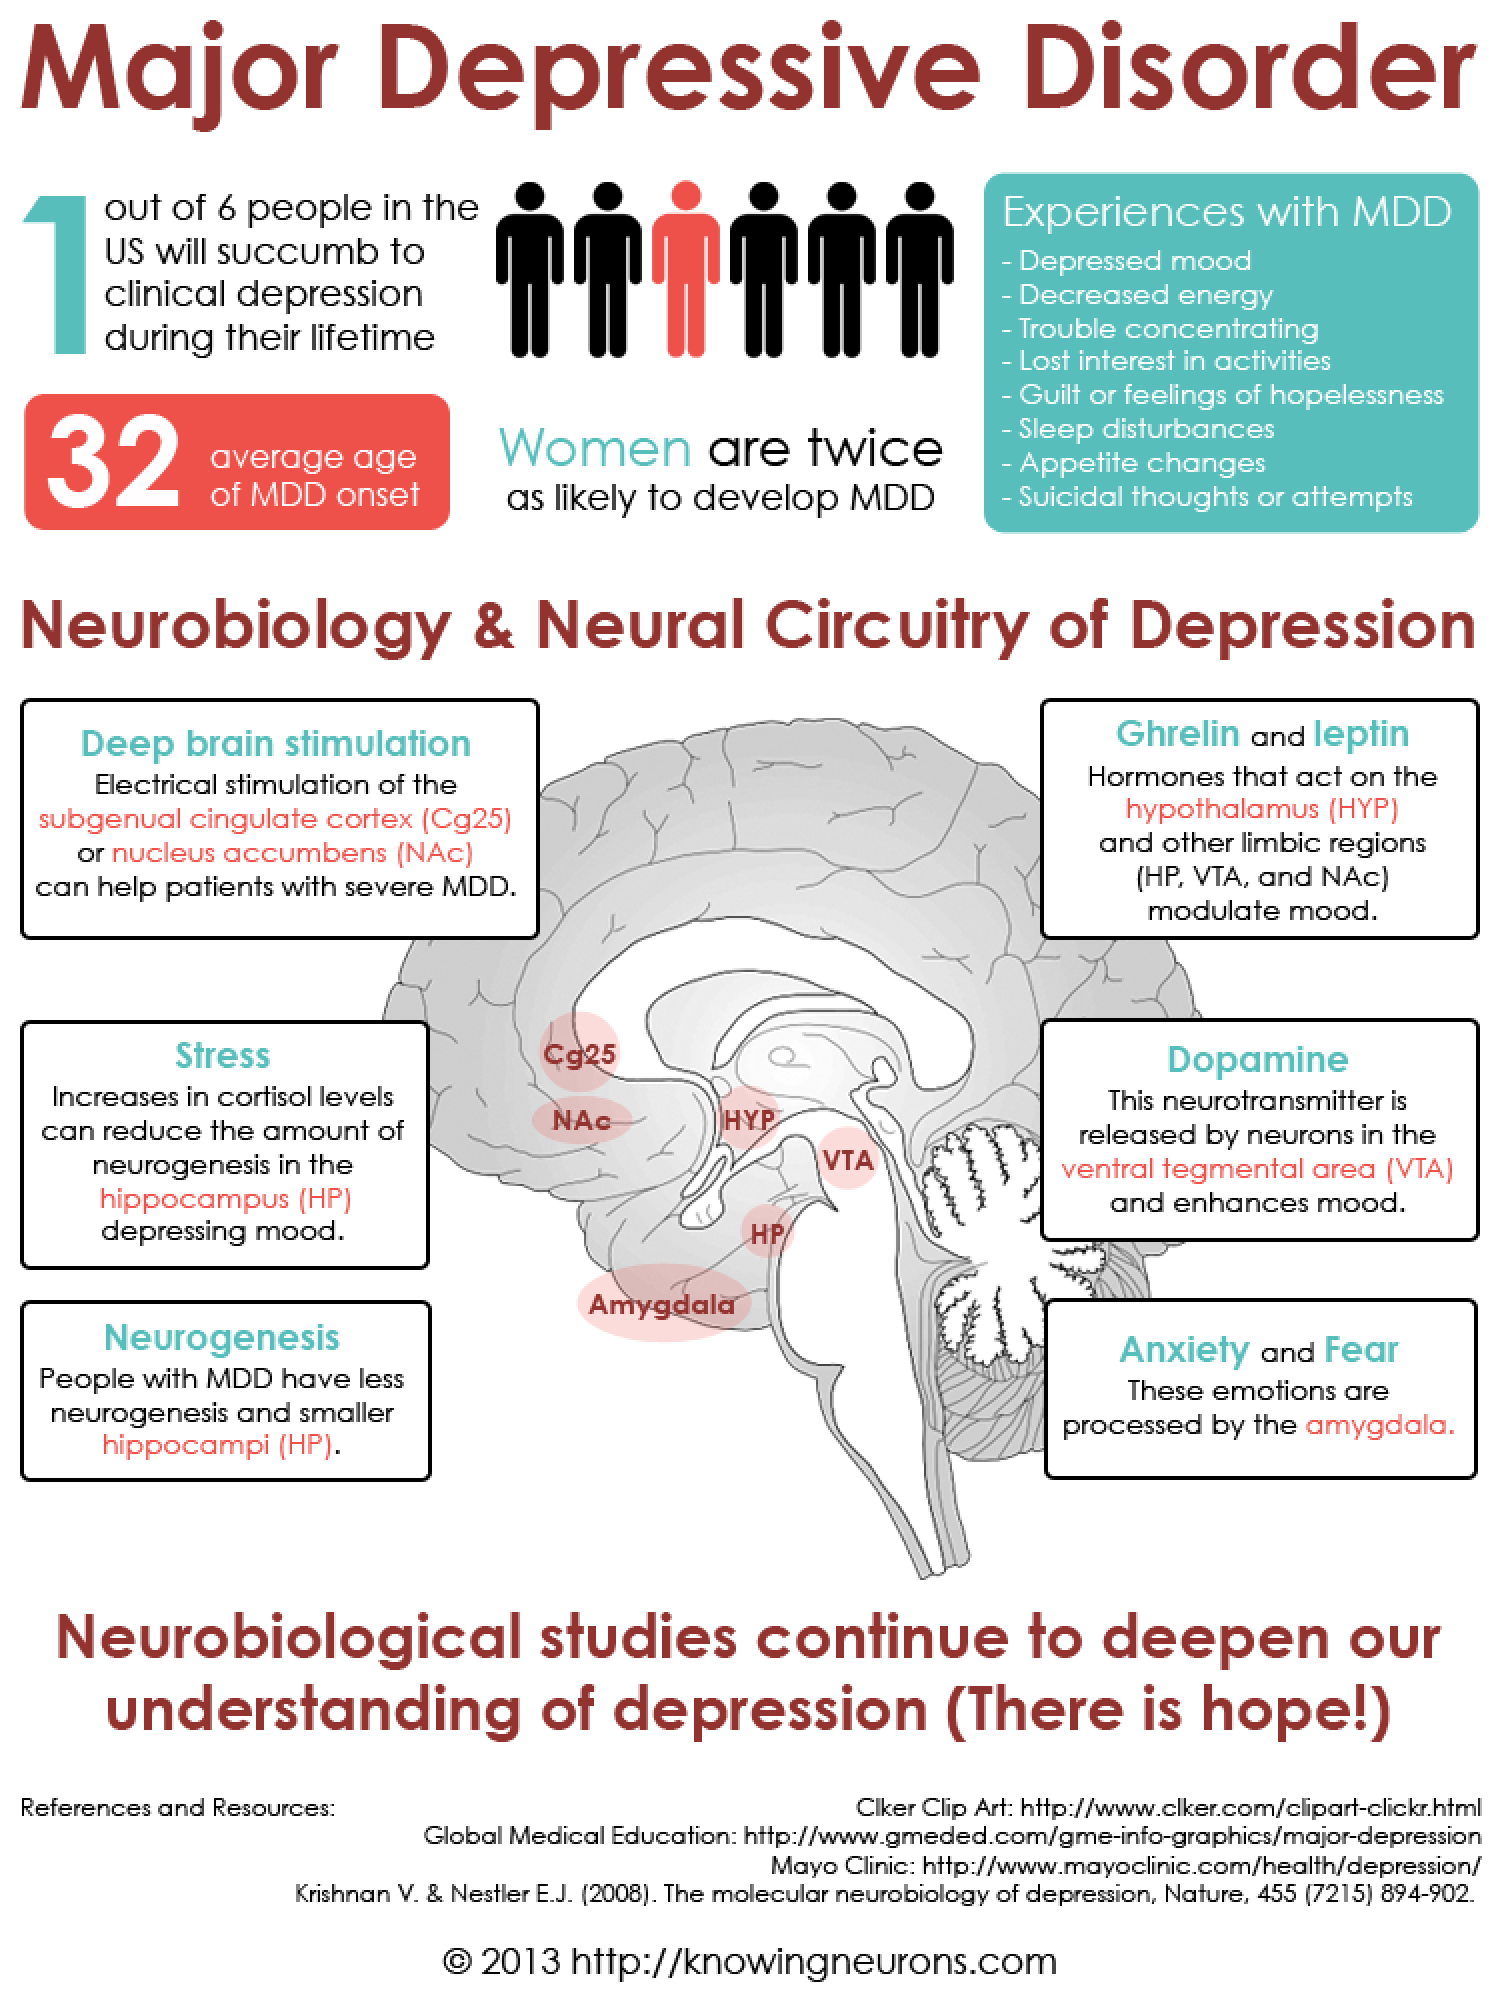 Neurobiology and Neural Circuitry of Depression